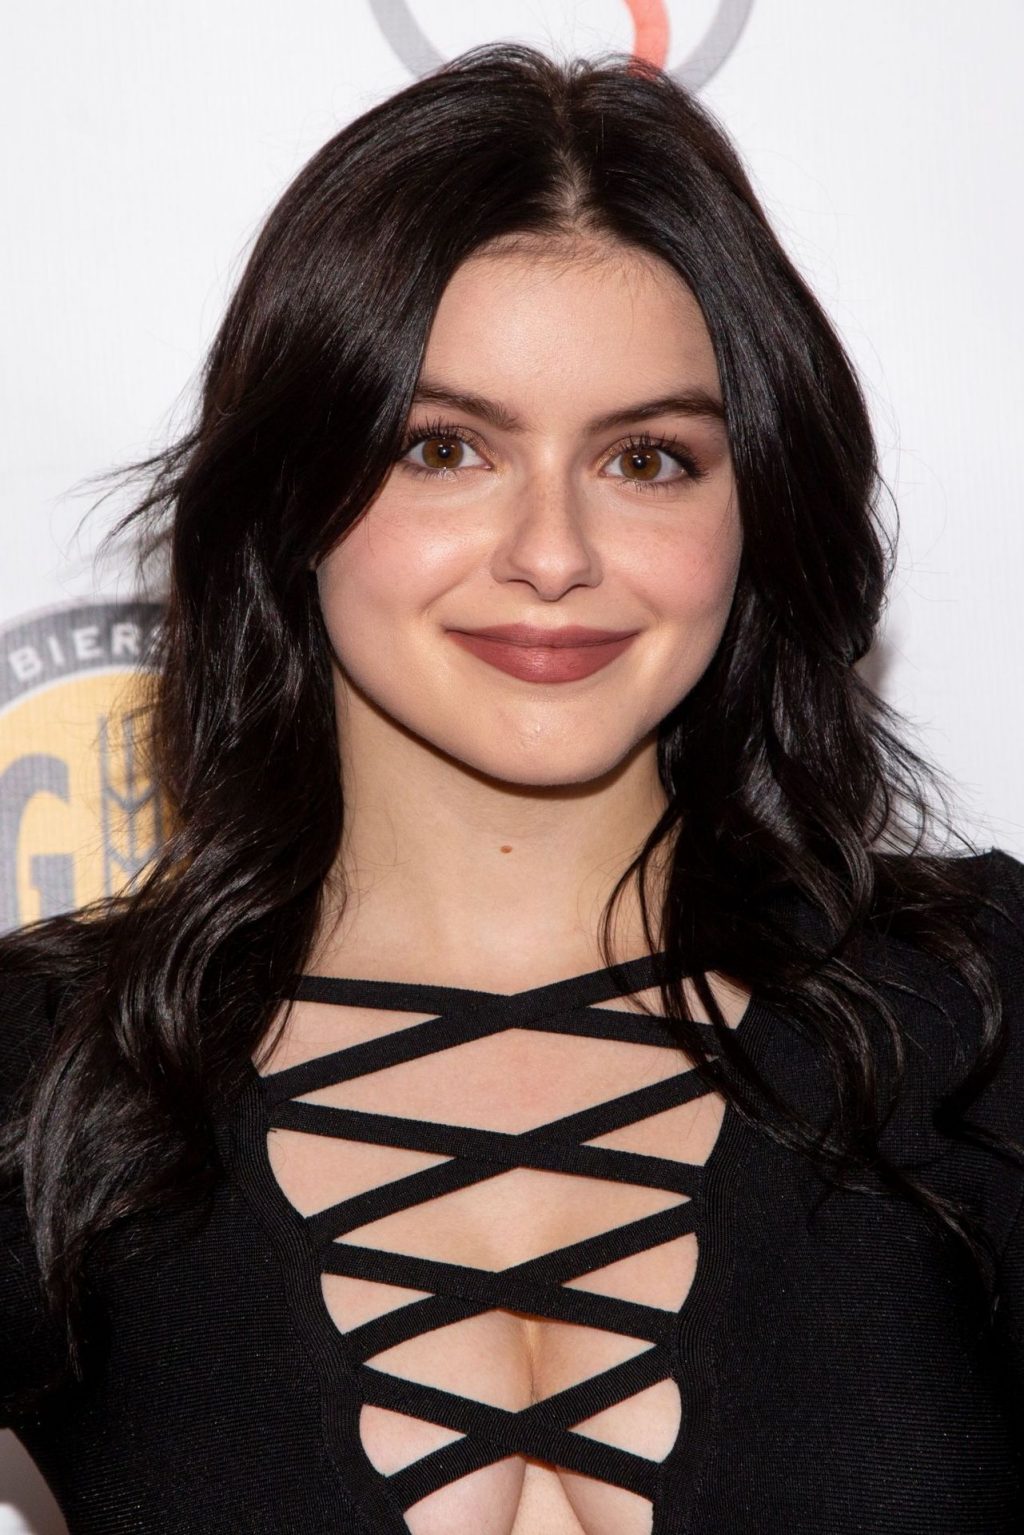 Ariel Winter Cleavage The Fappening 2014 2020 Celebrity